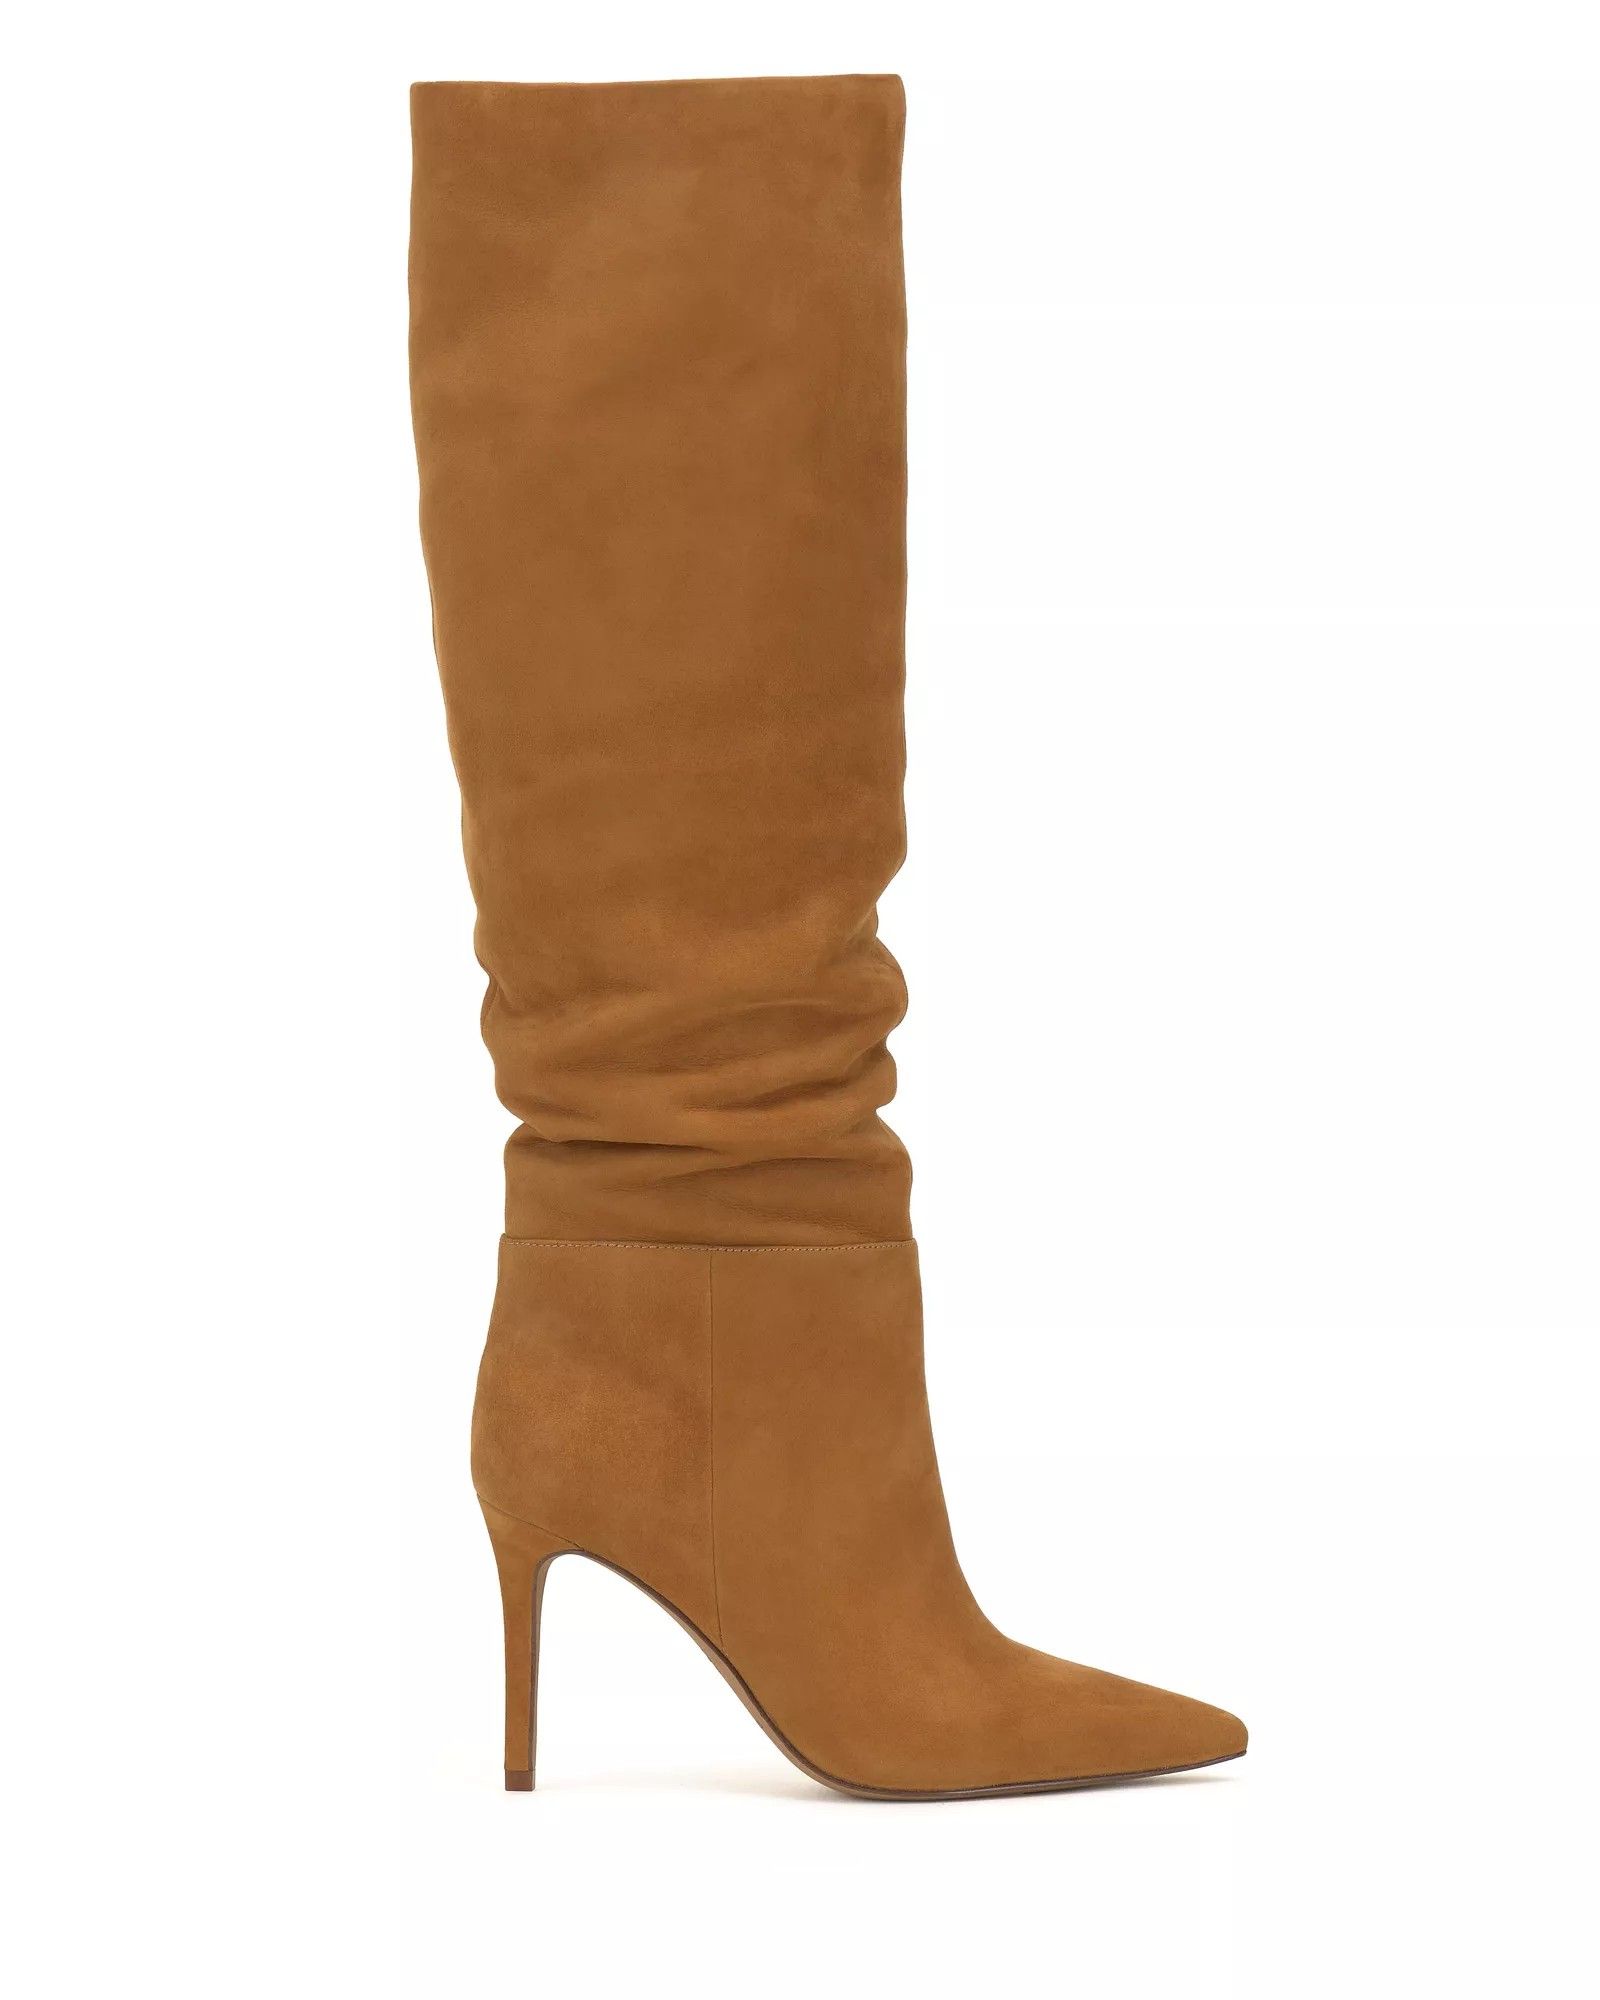 Vince Camuto Kashleigh Wide-calf Boot | Vince Camuto